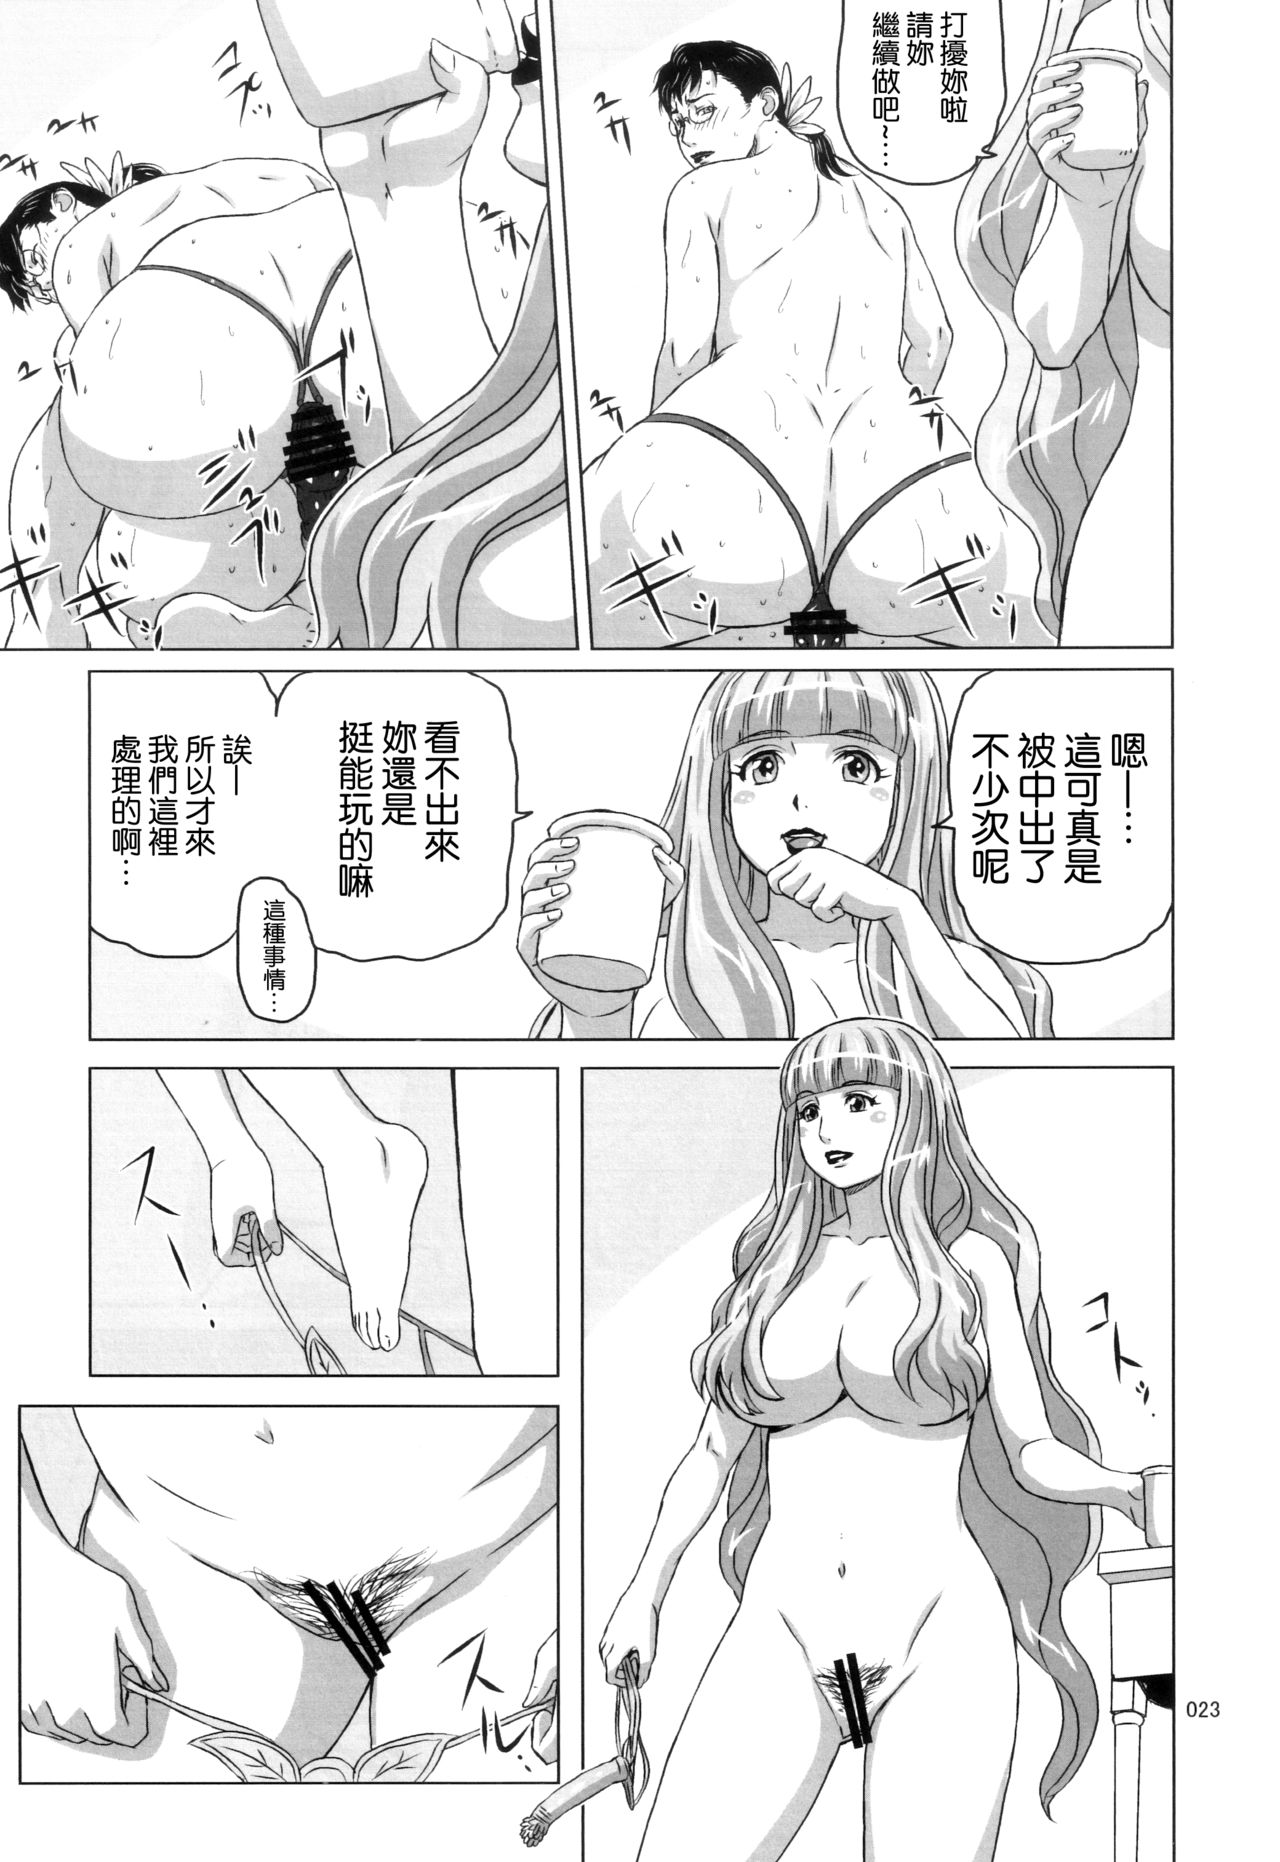 (C83) [Shiawase Pullin Dou (Ninroku)] Package Meat 4.5 (Queen's Blade) [Chinese] [不咕鸟汉化组] (C83) [しあわせプリン堂 (認六)] Package-Meat 4.5 (クイーンズブレイド) [中国翻訳]